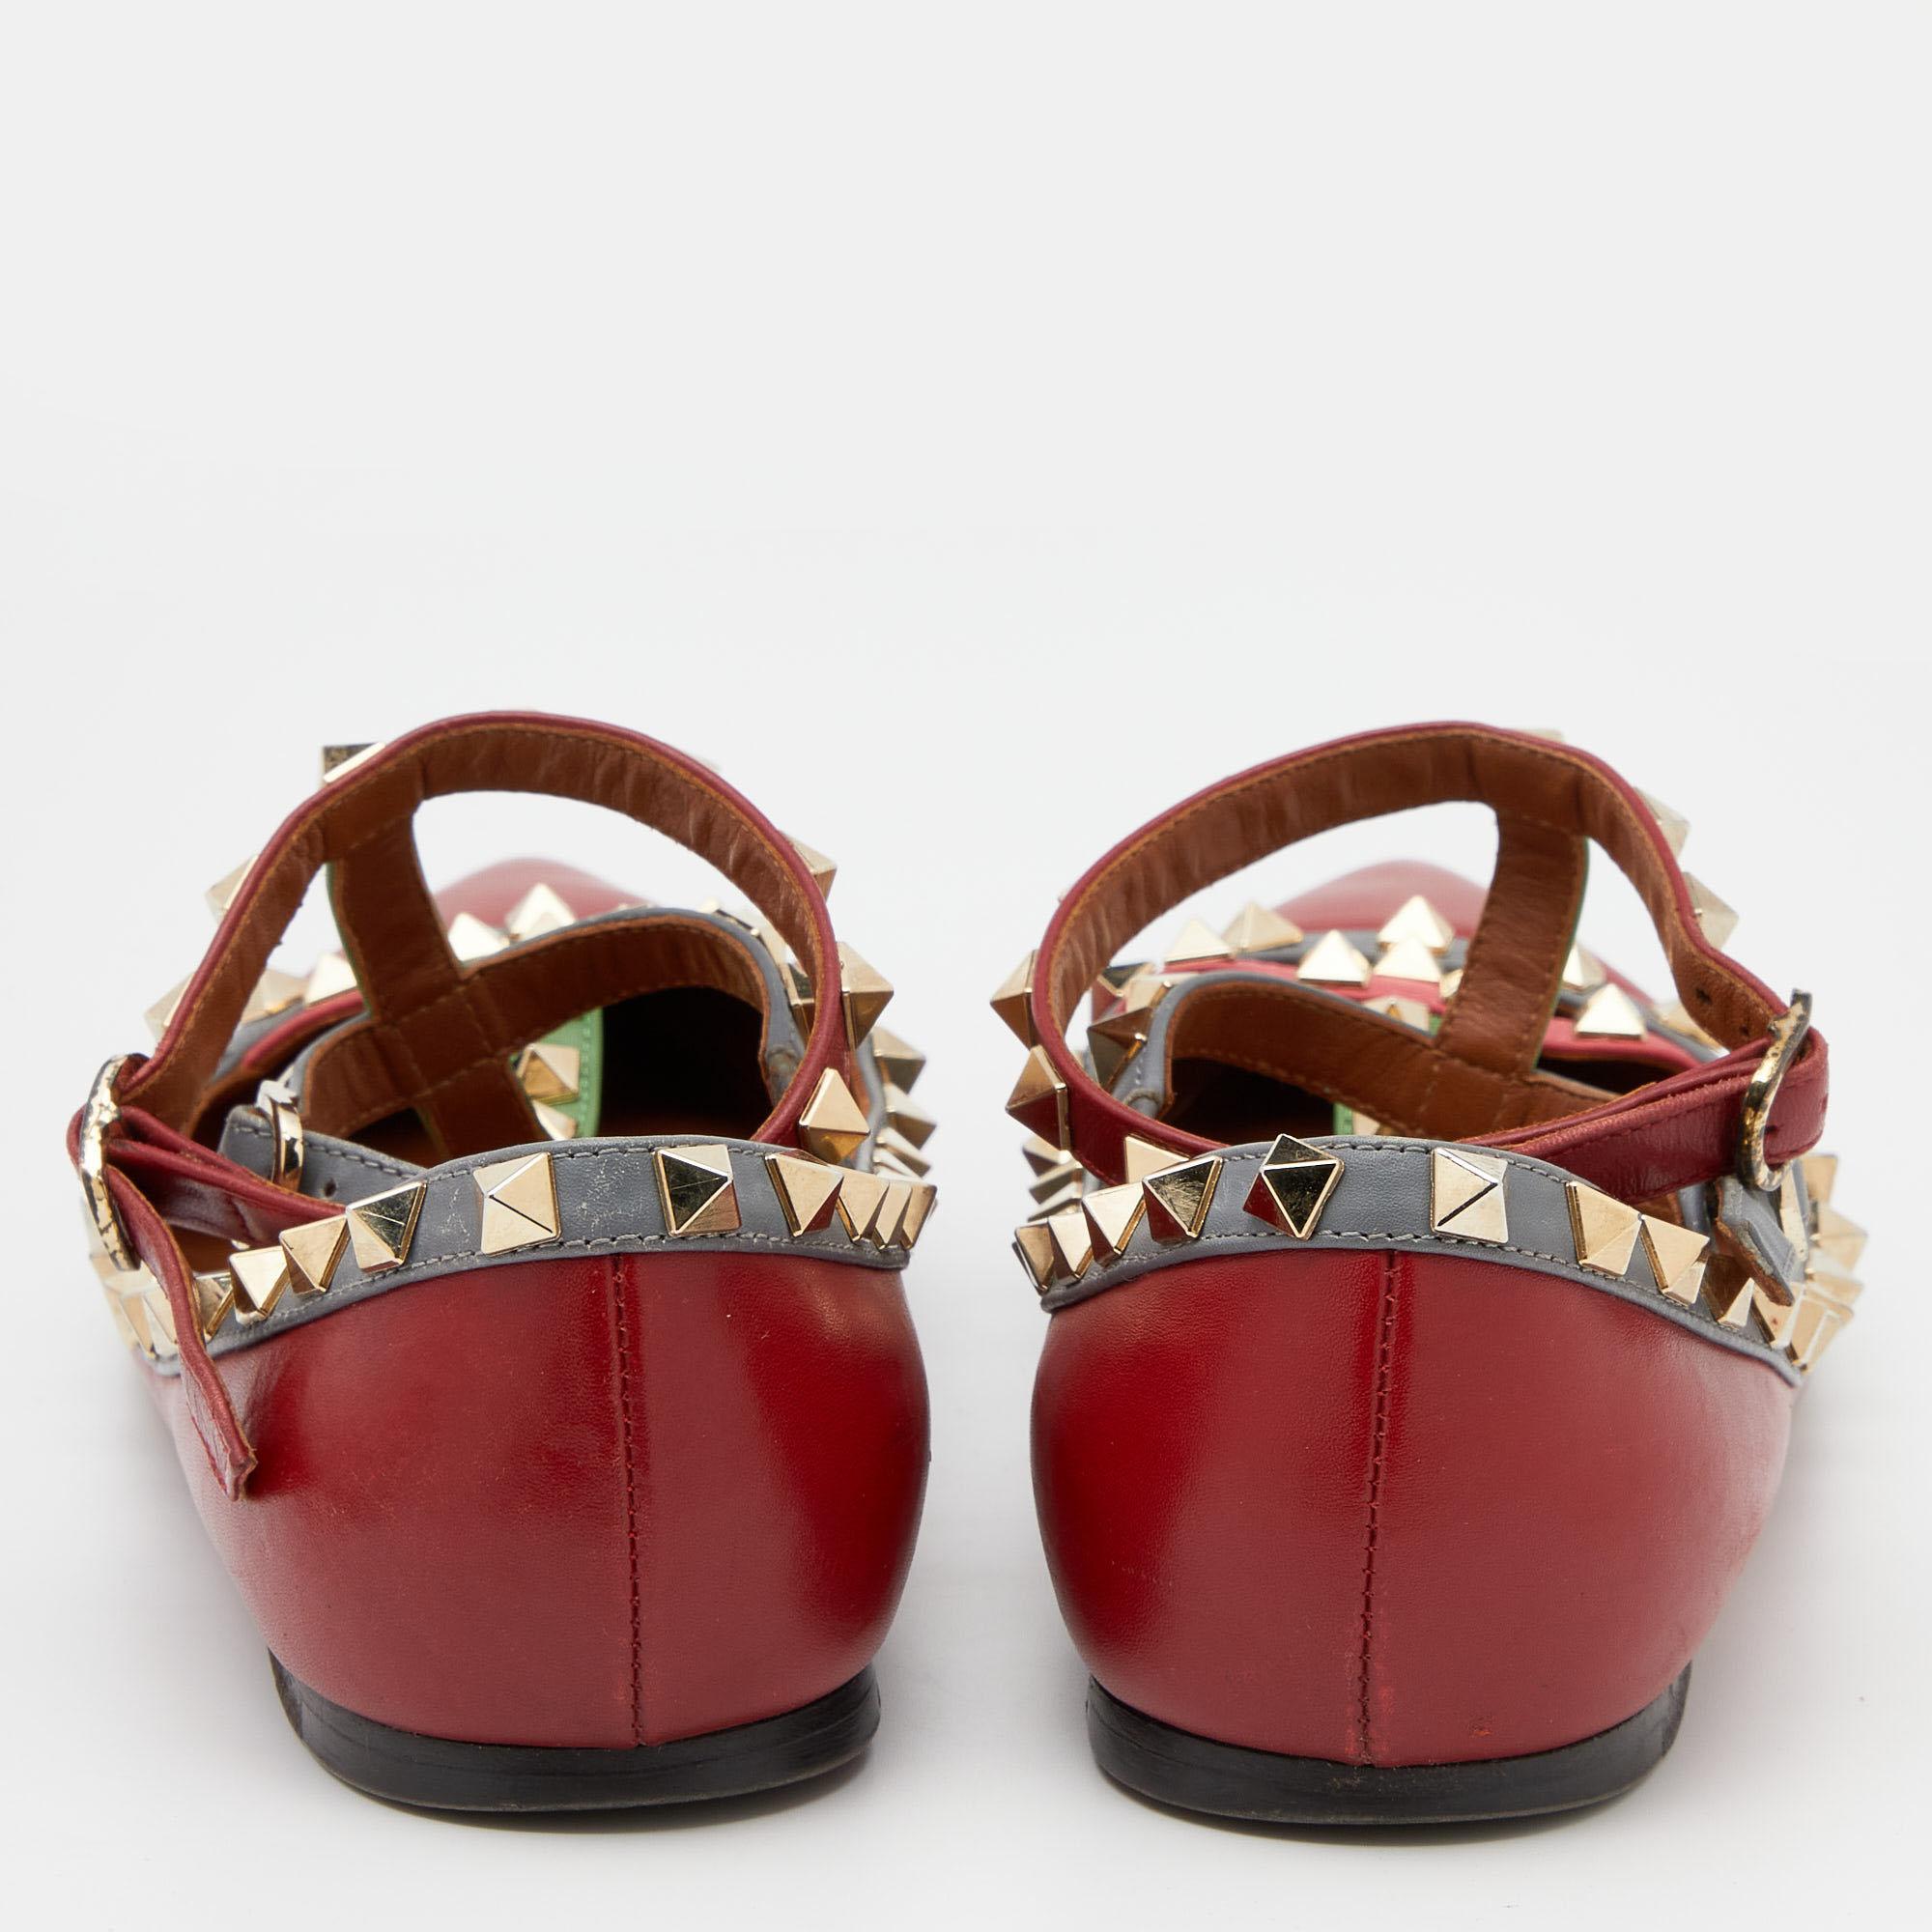 Valentino Red Leather Rockstud Caged Ankle Cuff Ballet Flats Size 35.5 1